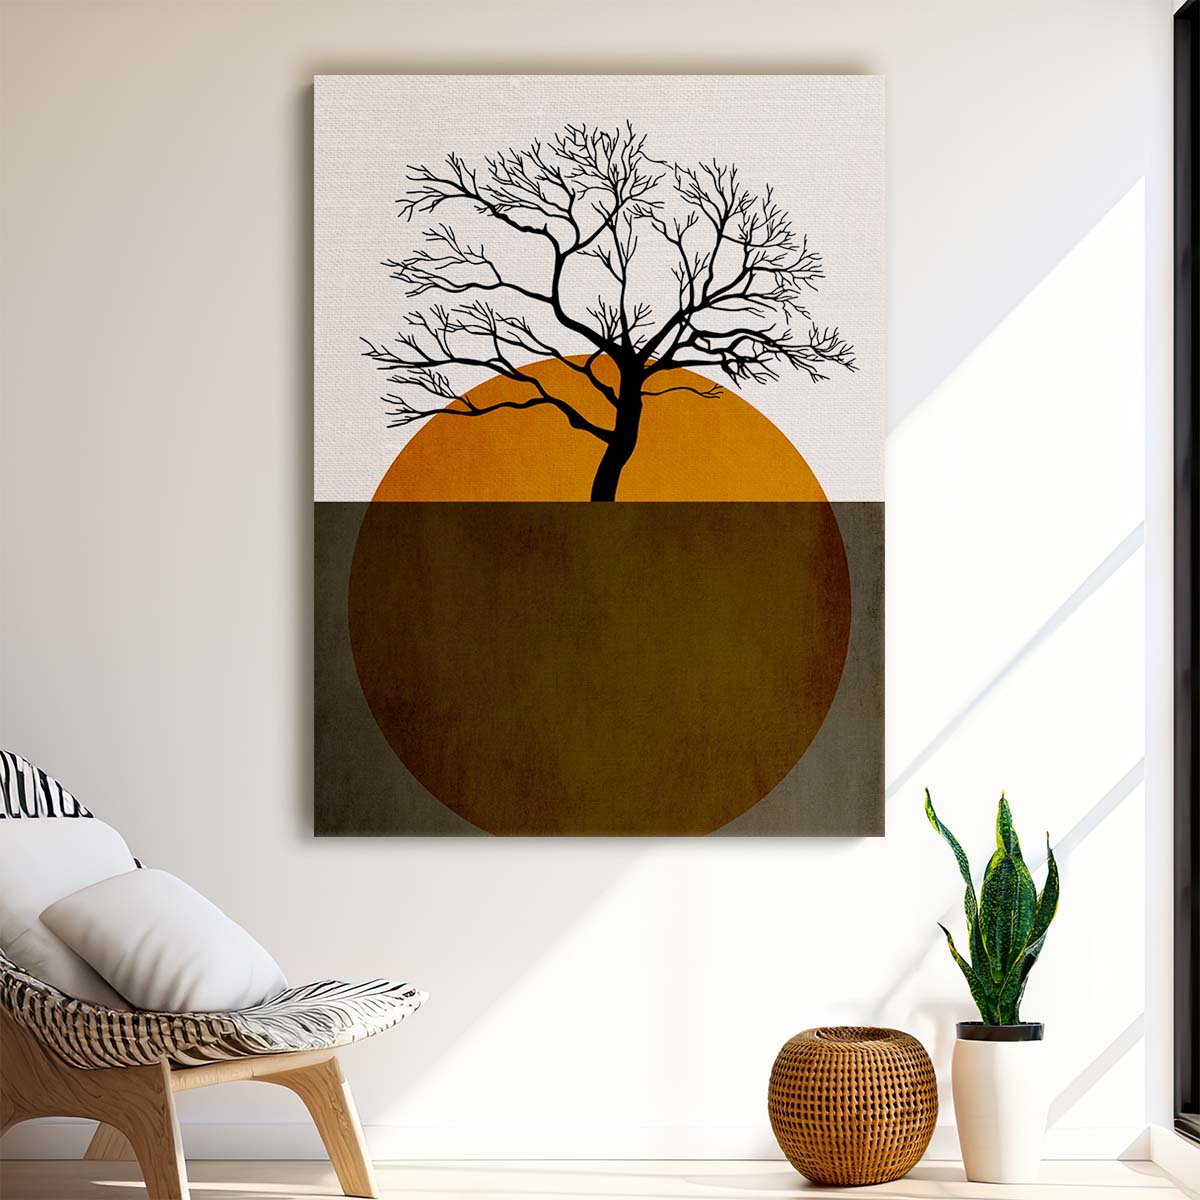 Winter Tree Silhouette Illustration Art by Kubistika, Nature Landscape by Luxuriance Designs, made in USA